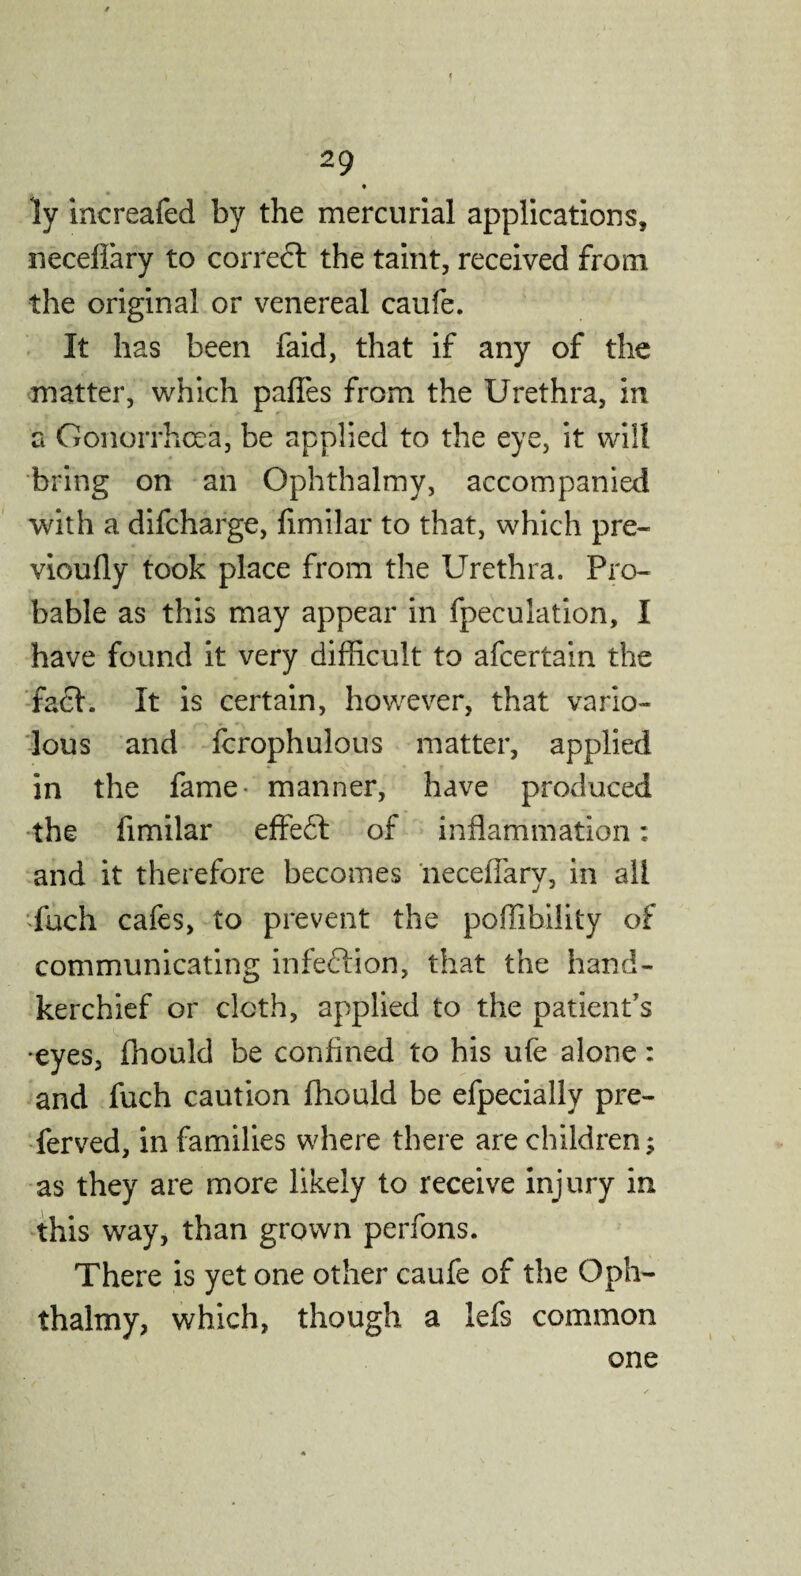 ly increafed by the mercurial applications, neceflary to corredt the taint, received from the original or venereal caufe. It has been faid, that if any of the matter, which palfes from the Urethra, in a Gonorrhoea, be applied to the eye, it will bring on an Ophthalmy, accompanied with a difcharge, fimilar to that, which pre- vioufly took place from the Urethra. Pro¬ bable as this may appear in fpeculation, I have found it very difficult to afcertain the fact. It is certain, however, that vario¬ lous and fcrophulous matter, applied in the fame- manner, have produced the fimilar effedt of inflammation: and it therefore becomes neceflary, in all fuch cafes, to prevent the poffibility of communicating infection, that the hand¬ kerchief or cloth, applied to the patient's •eyes, fhould be confined to his ufe alone: and fuch caution fhould be efpecially pre¬ served, in families where there are children; as they are more likely to receive injury in this way, than grown perfons. There is yet one other caufe of the Oph- thalmy, which, though a lefs common one